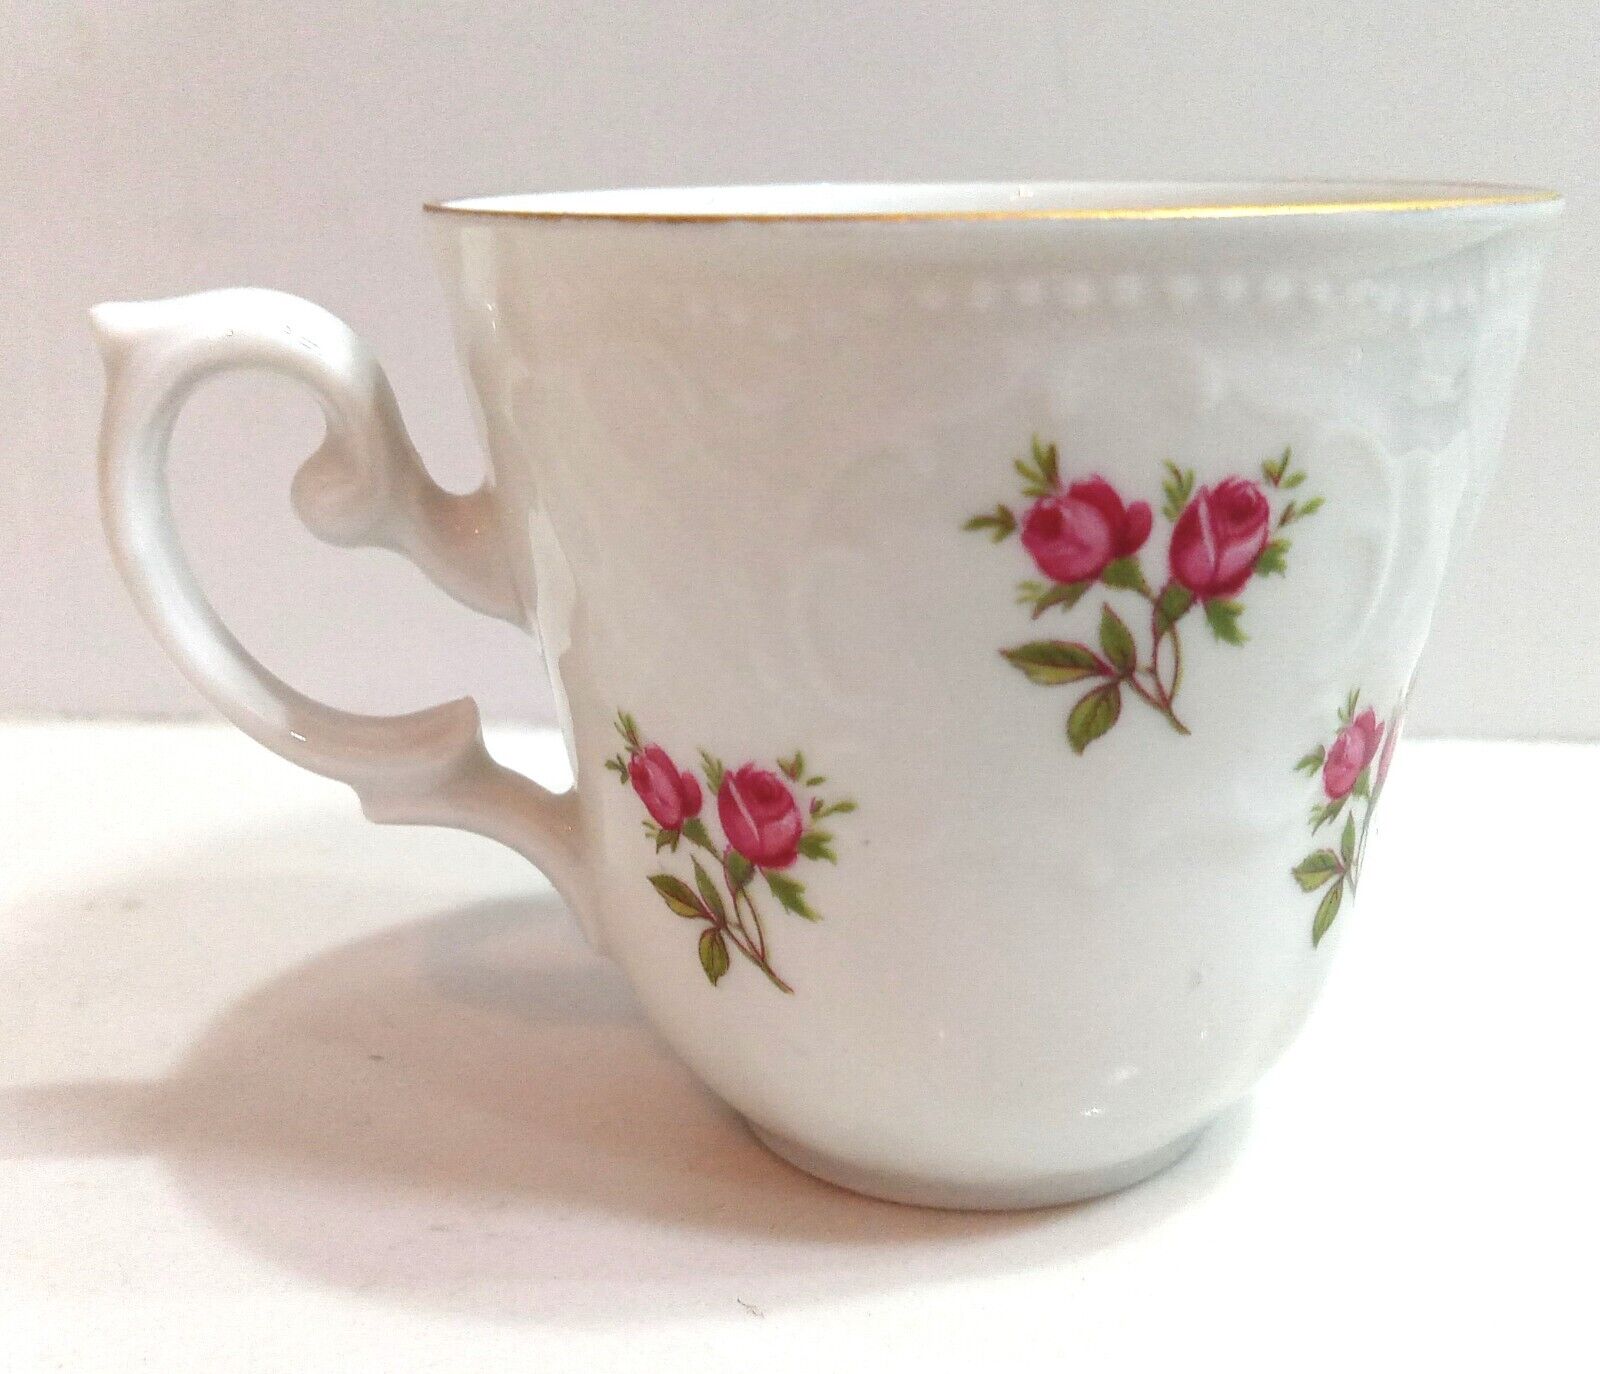 Seltmann Weiden  Bavaria W. Germany Demitasse CUP Pink Roses REPLACEMENT